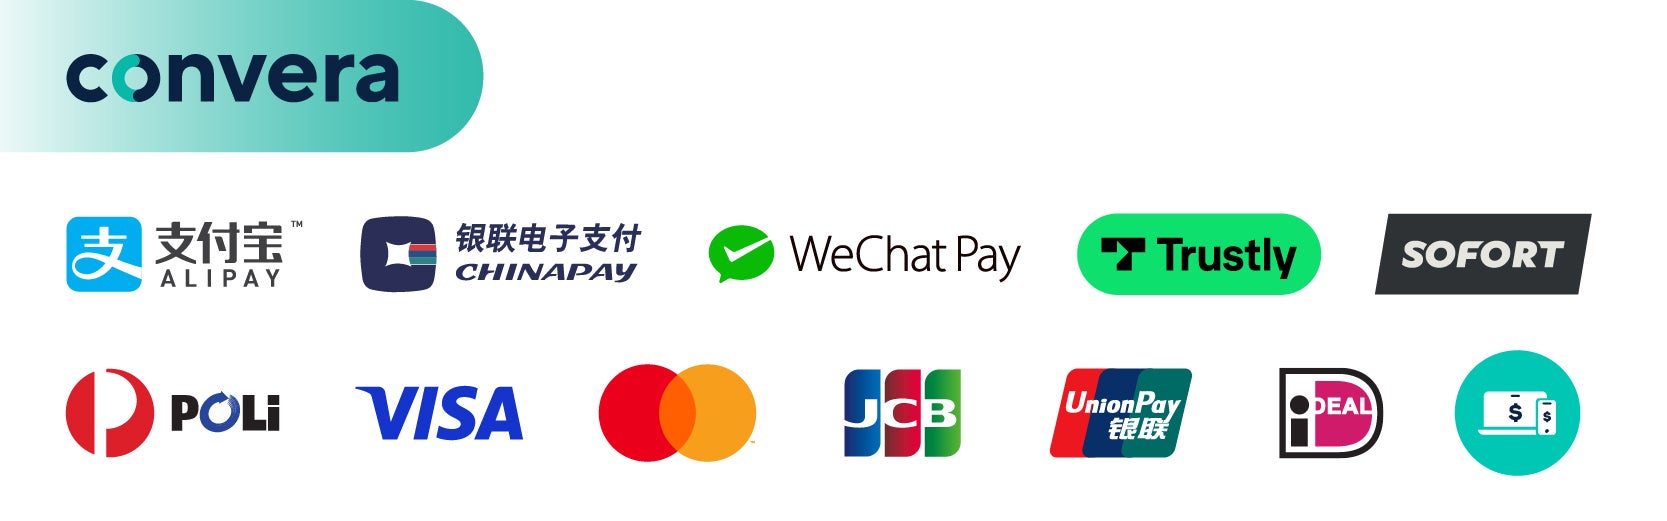 convera payment logo with payment options